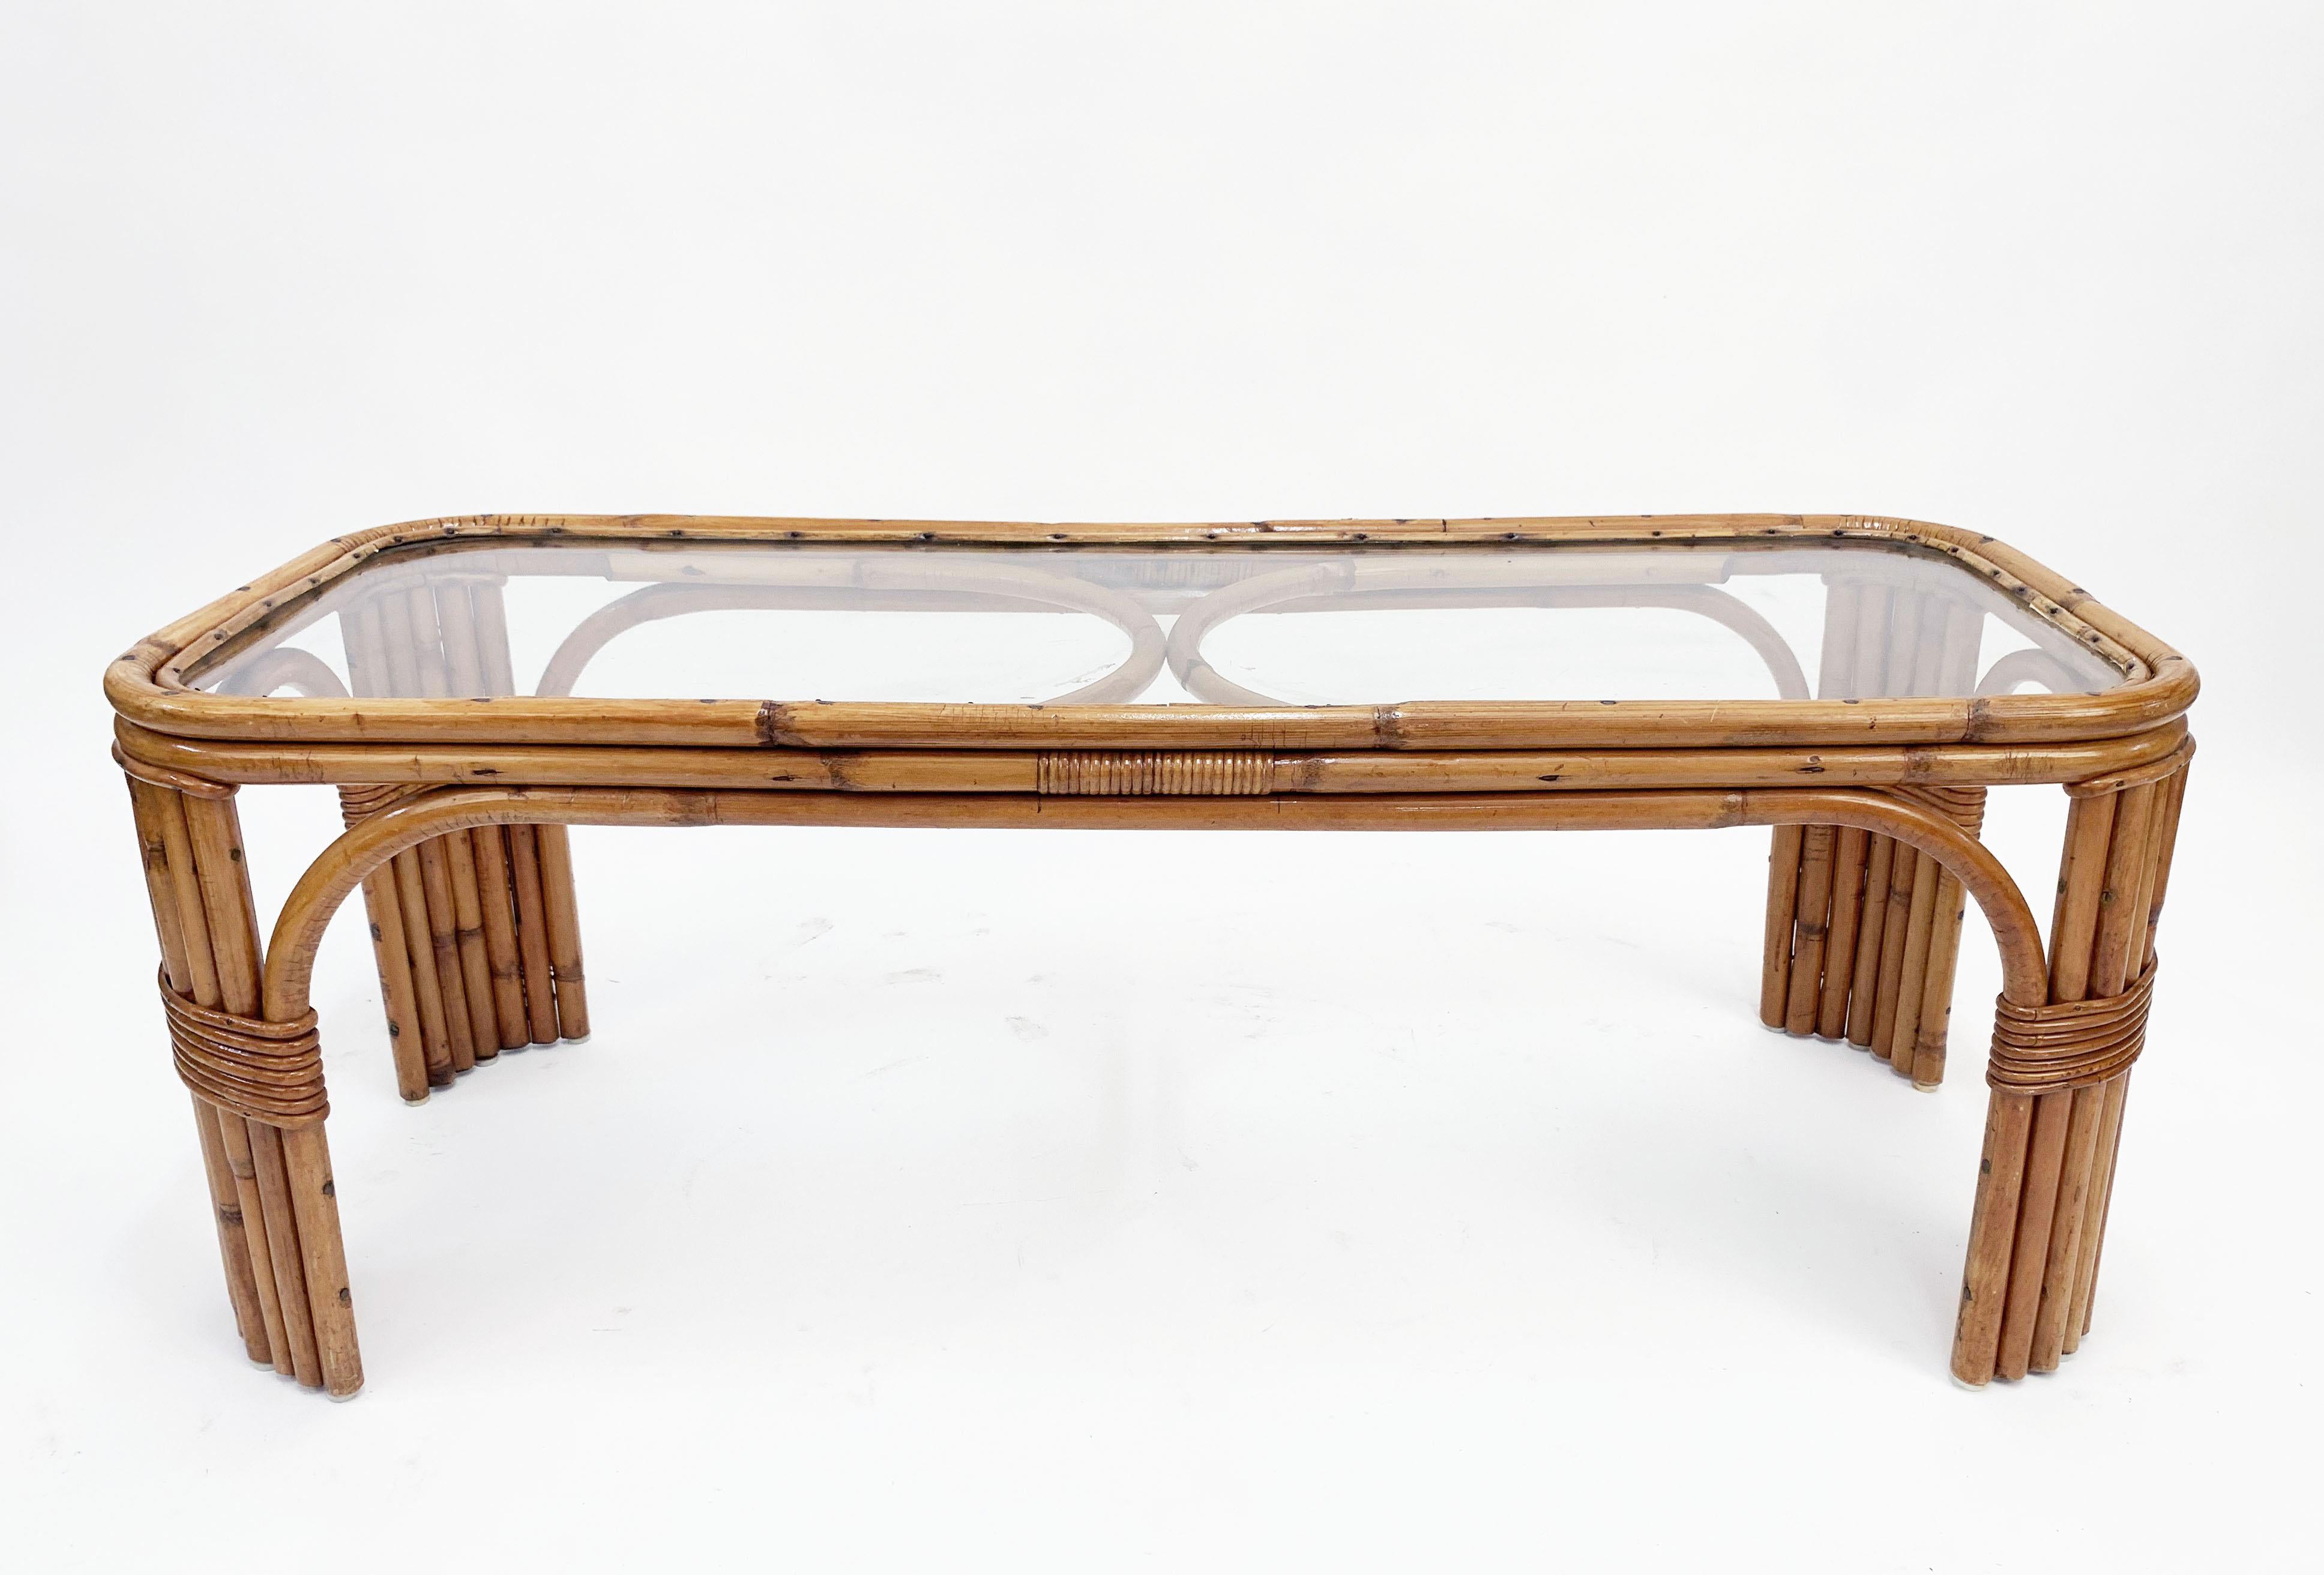 20th Century Midcentury Bamboo and Rattan Italian Rectangular Coffee Table with Glass Top